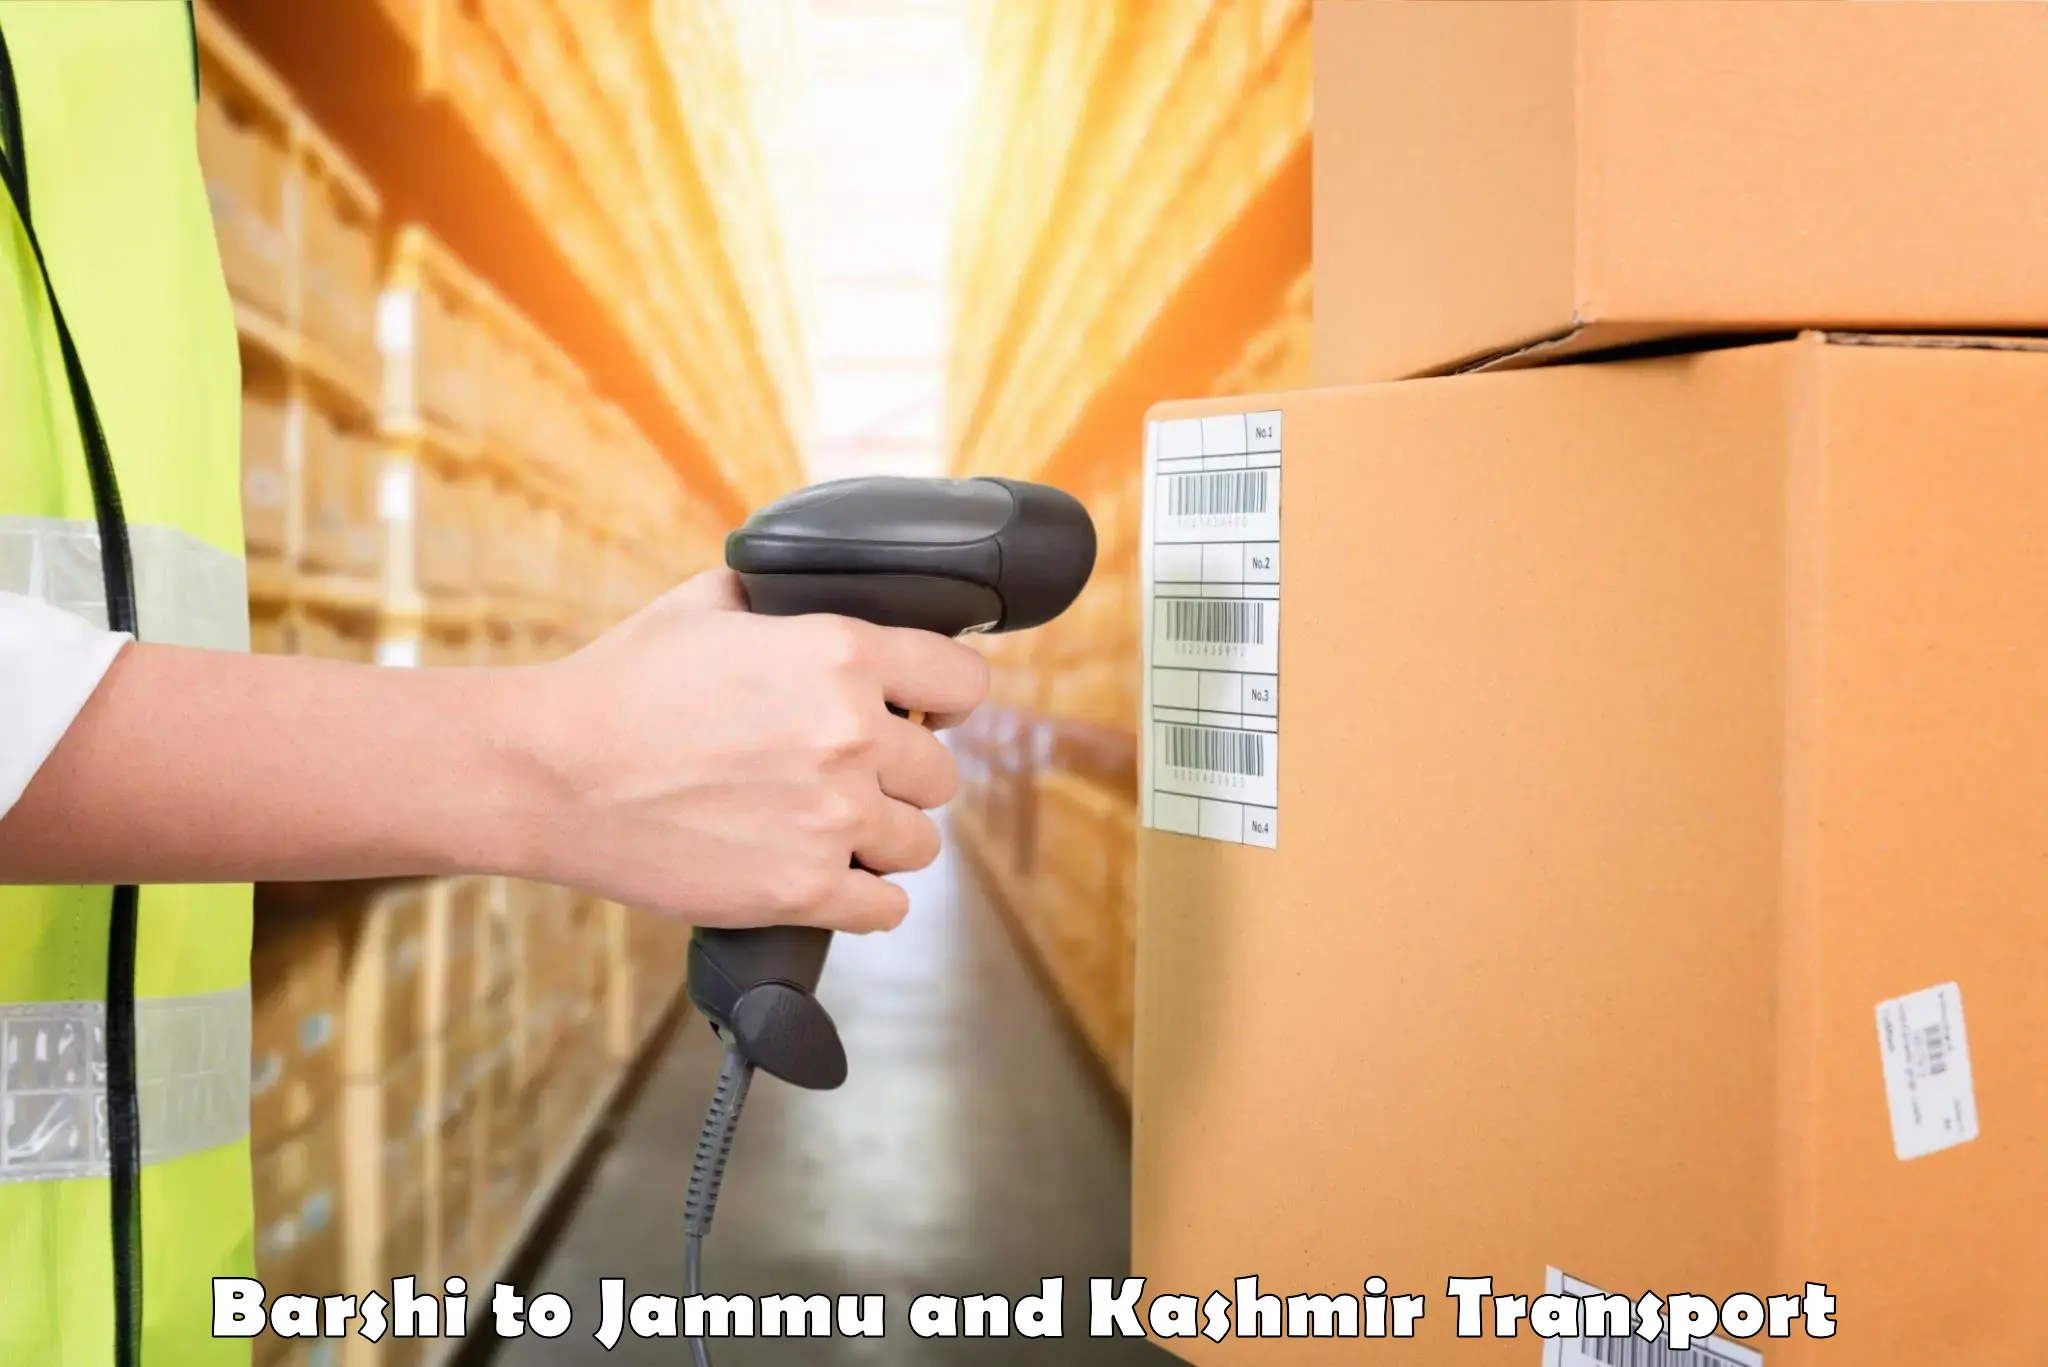 Air freight transport services Barshi to Jammu and Kashmir